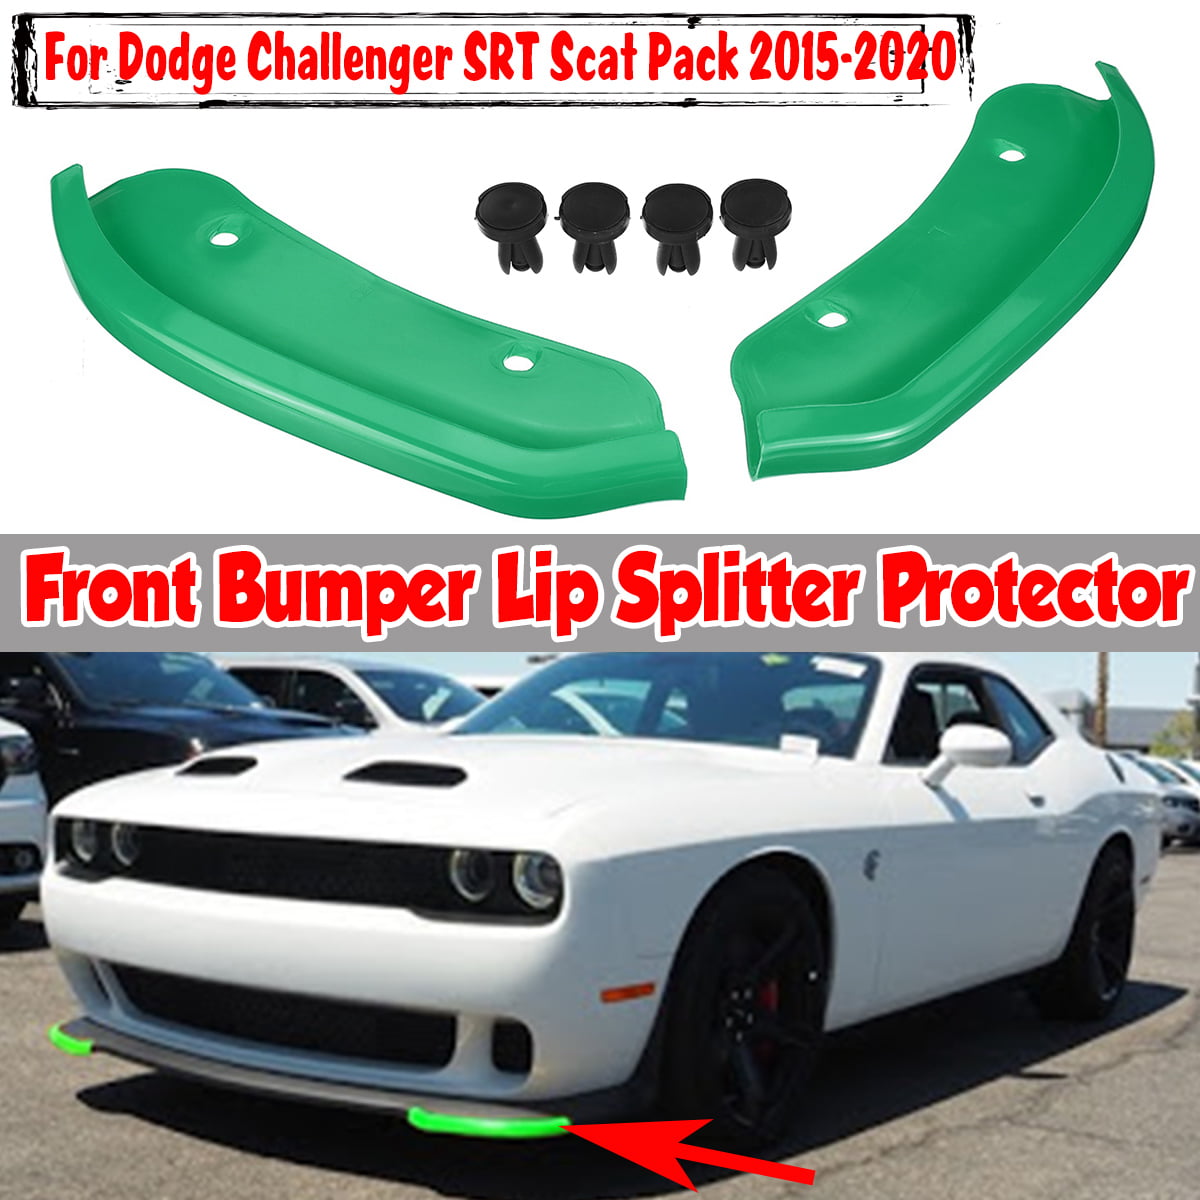 Front Bumper Lip Splitter Protector for Dodge Challenger R/T Scat Pack 2015-2020 Left Driver and Right Passenger Side Bumper Thumper Coverage Shock Absorbing 68327082AA 68327083AA Bumper Guard 